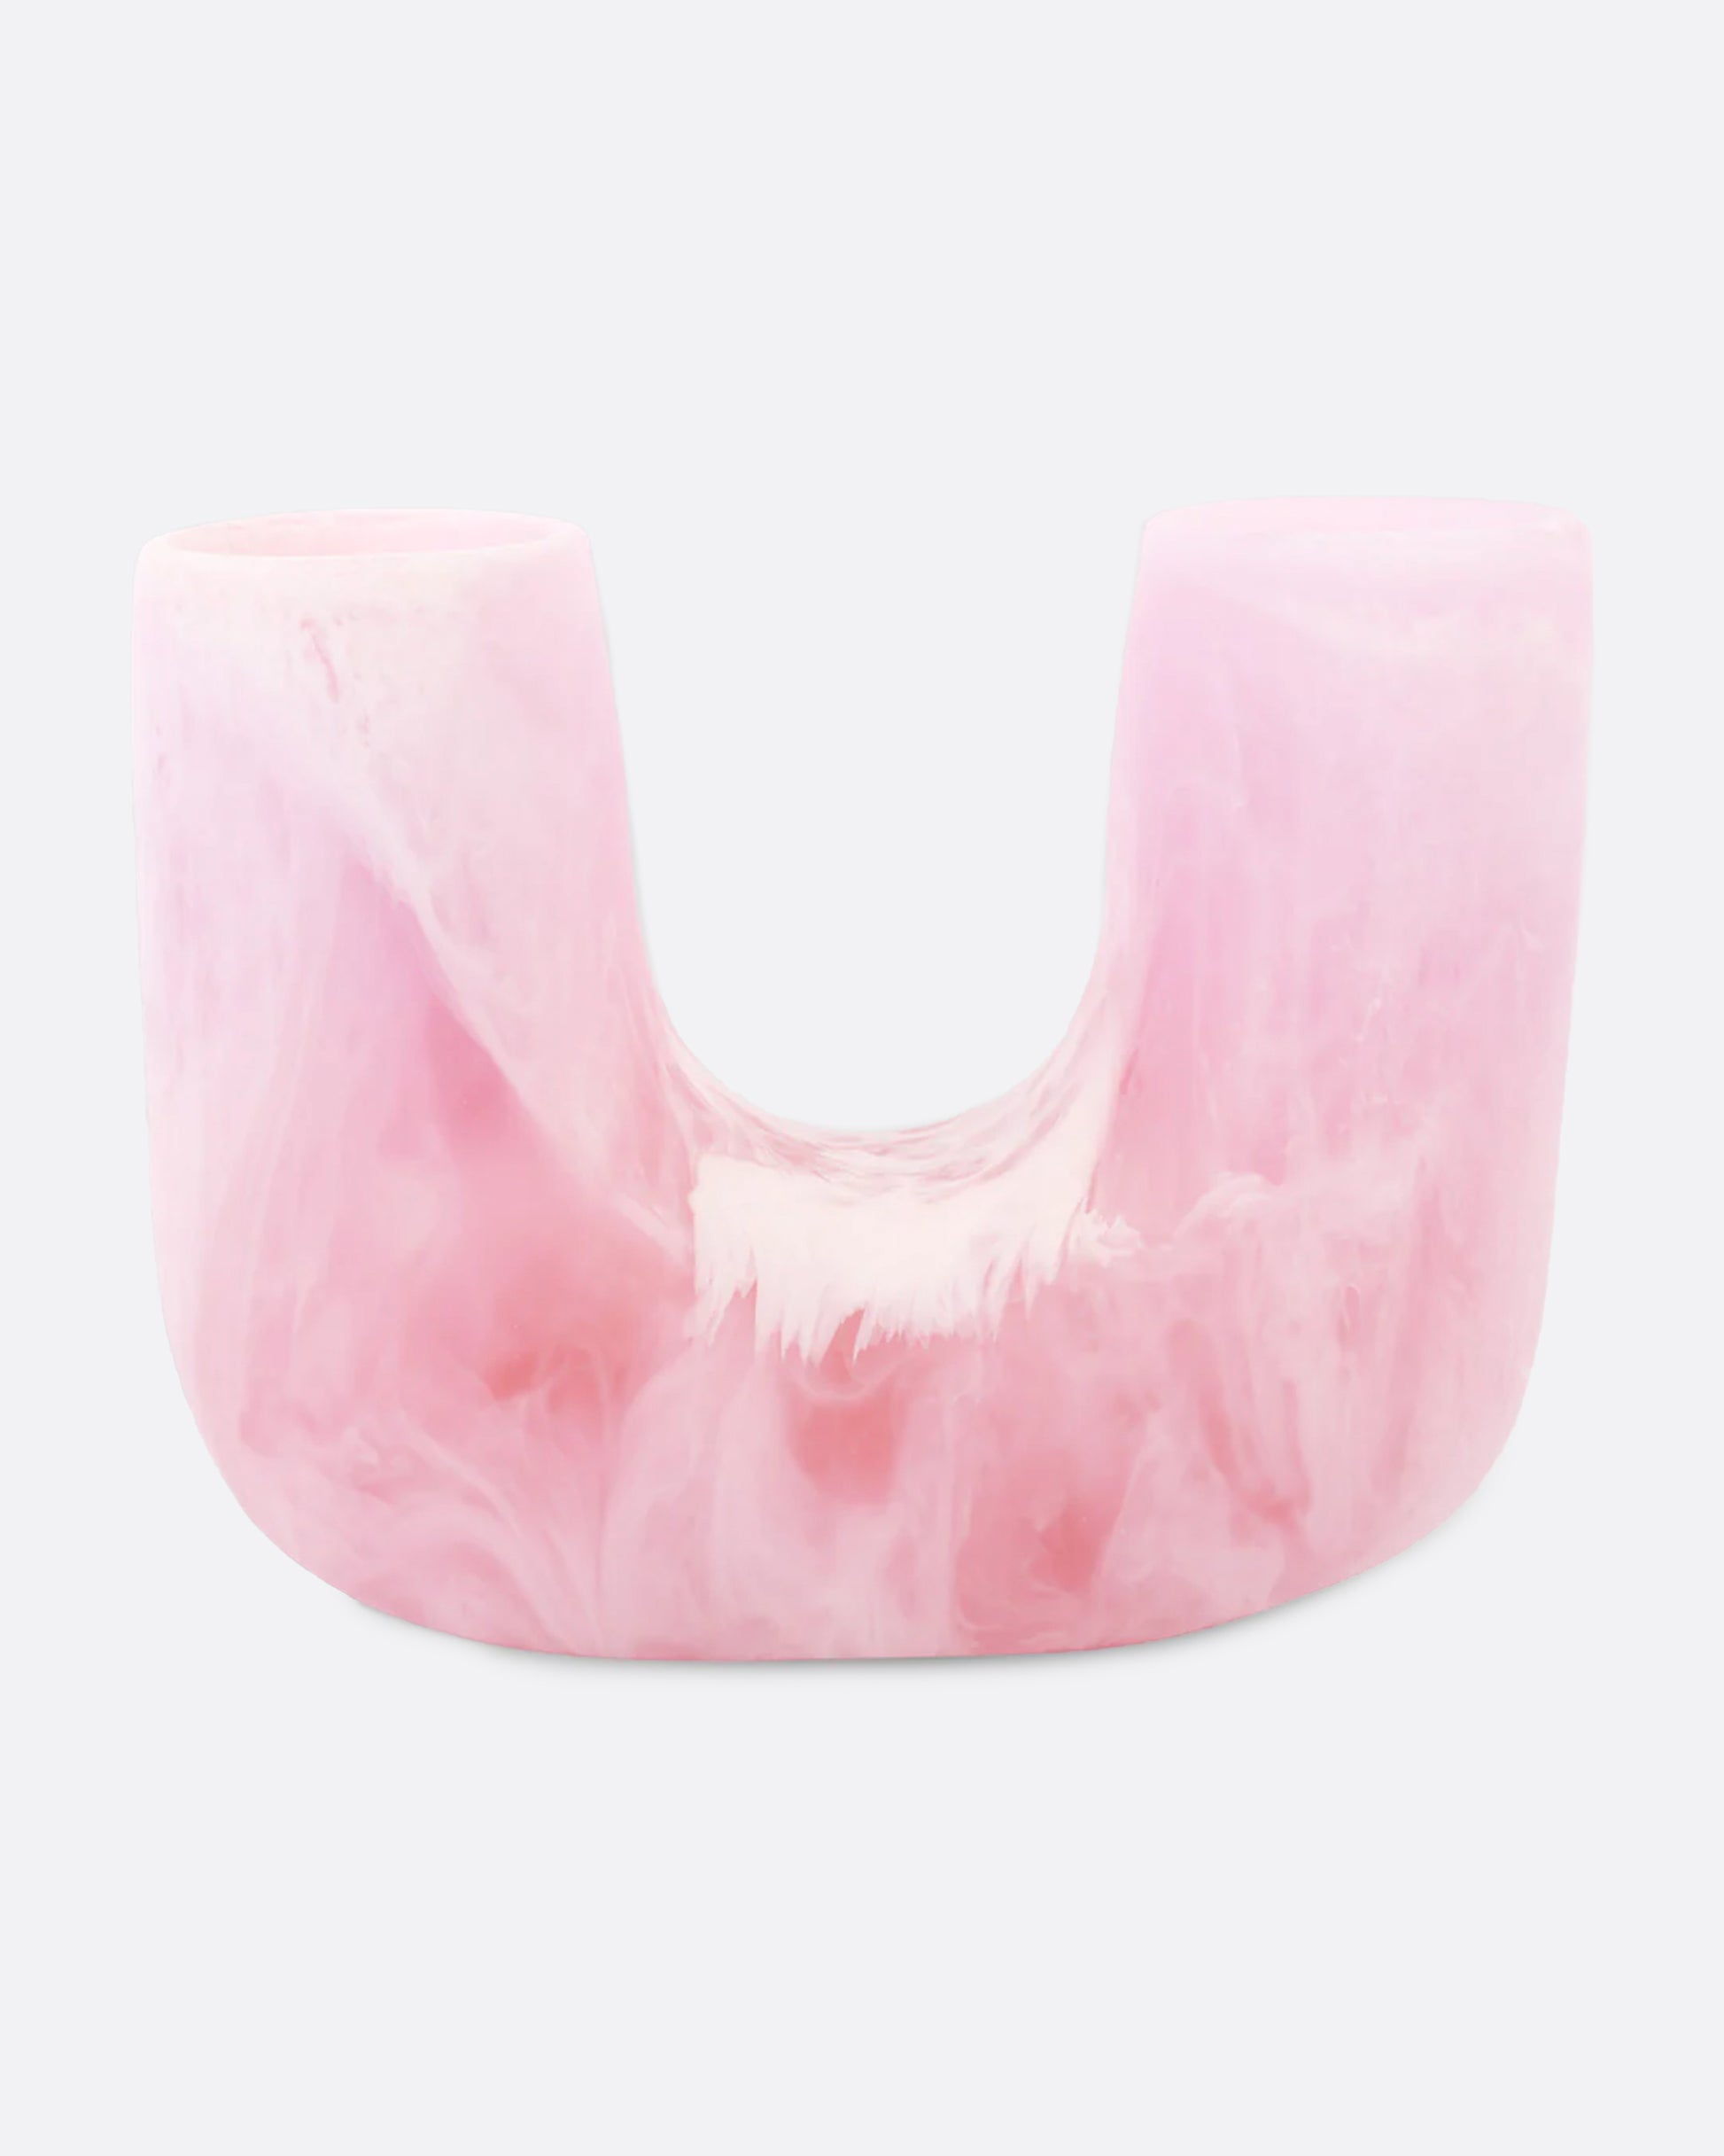 A swirled pink resin U-shaped vase with an opening on either side, shown from the front.